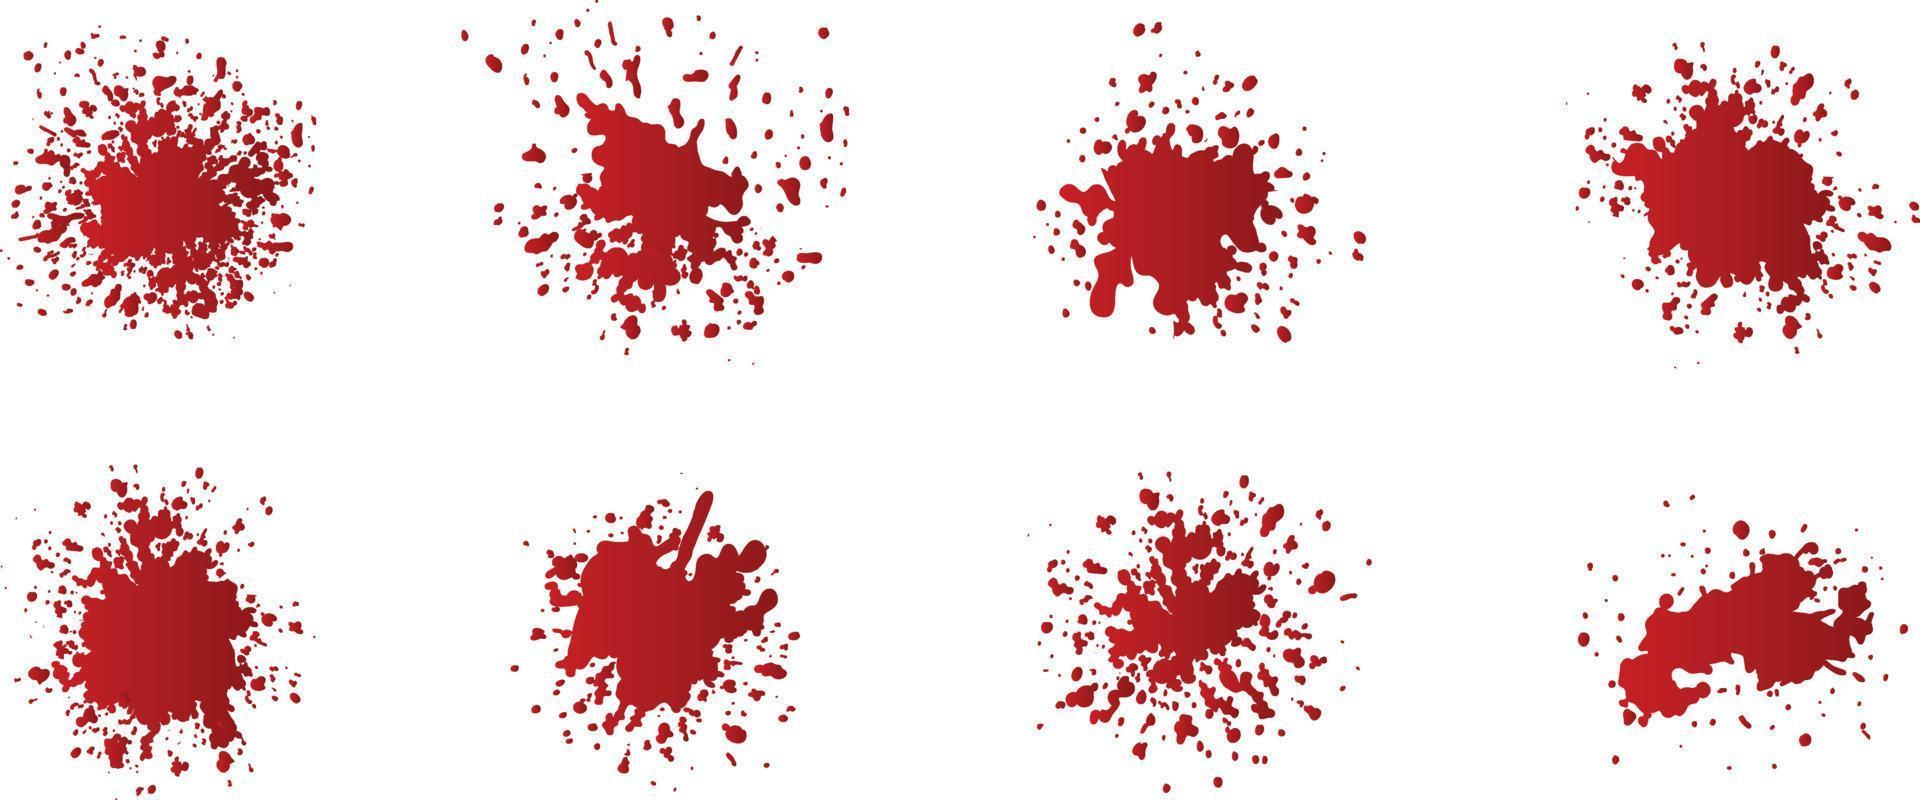 A collection of blood splatter vectors for artwork compositions